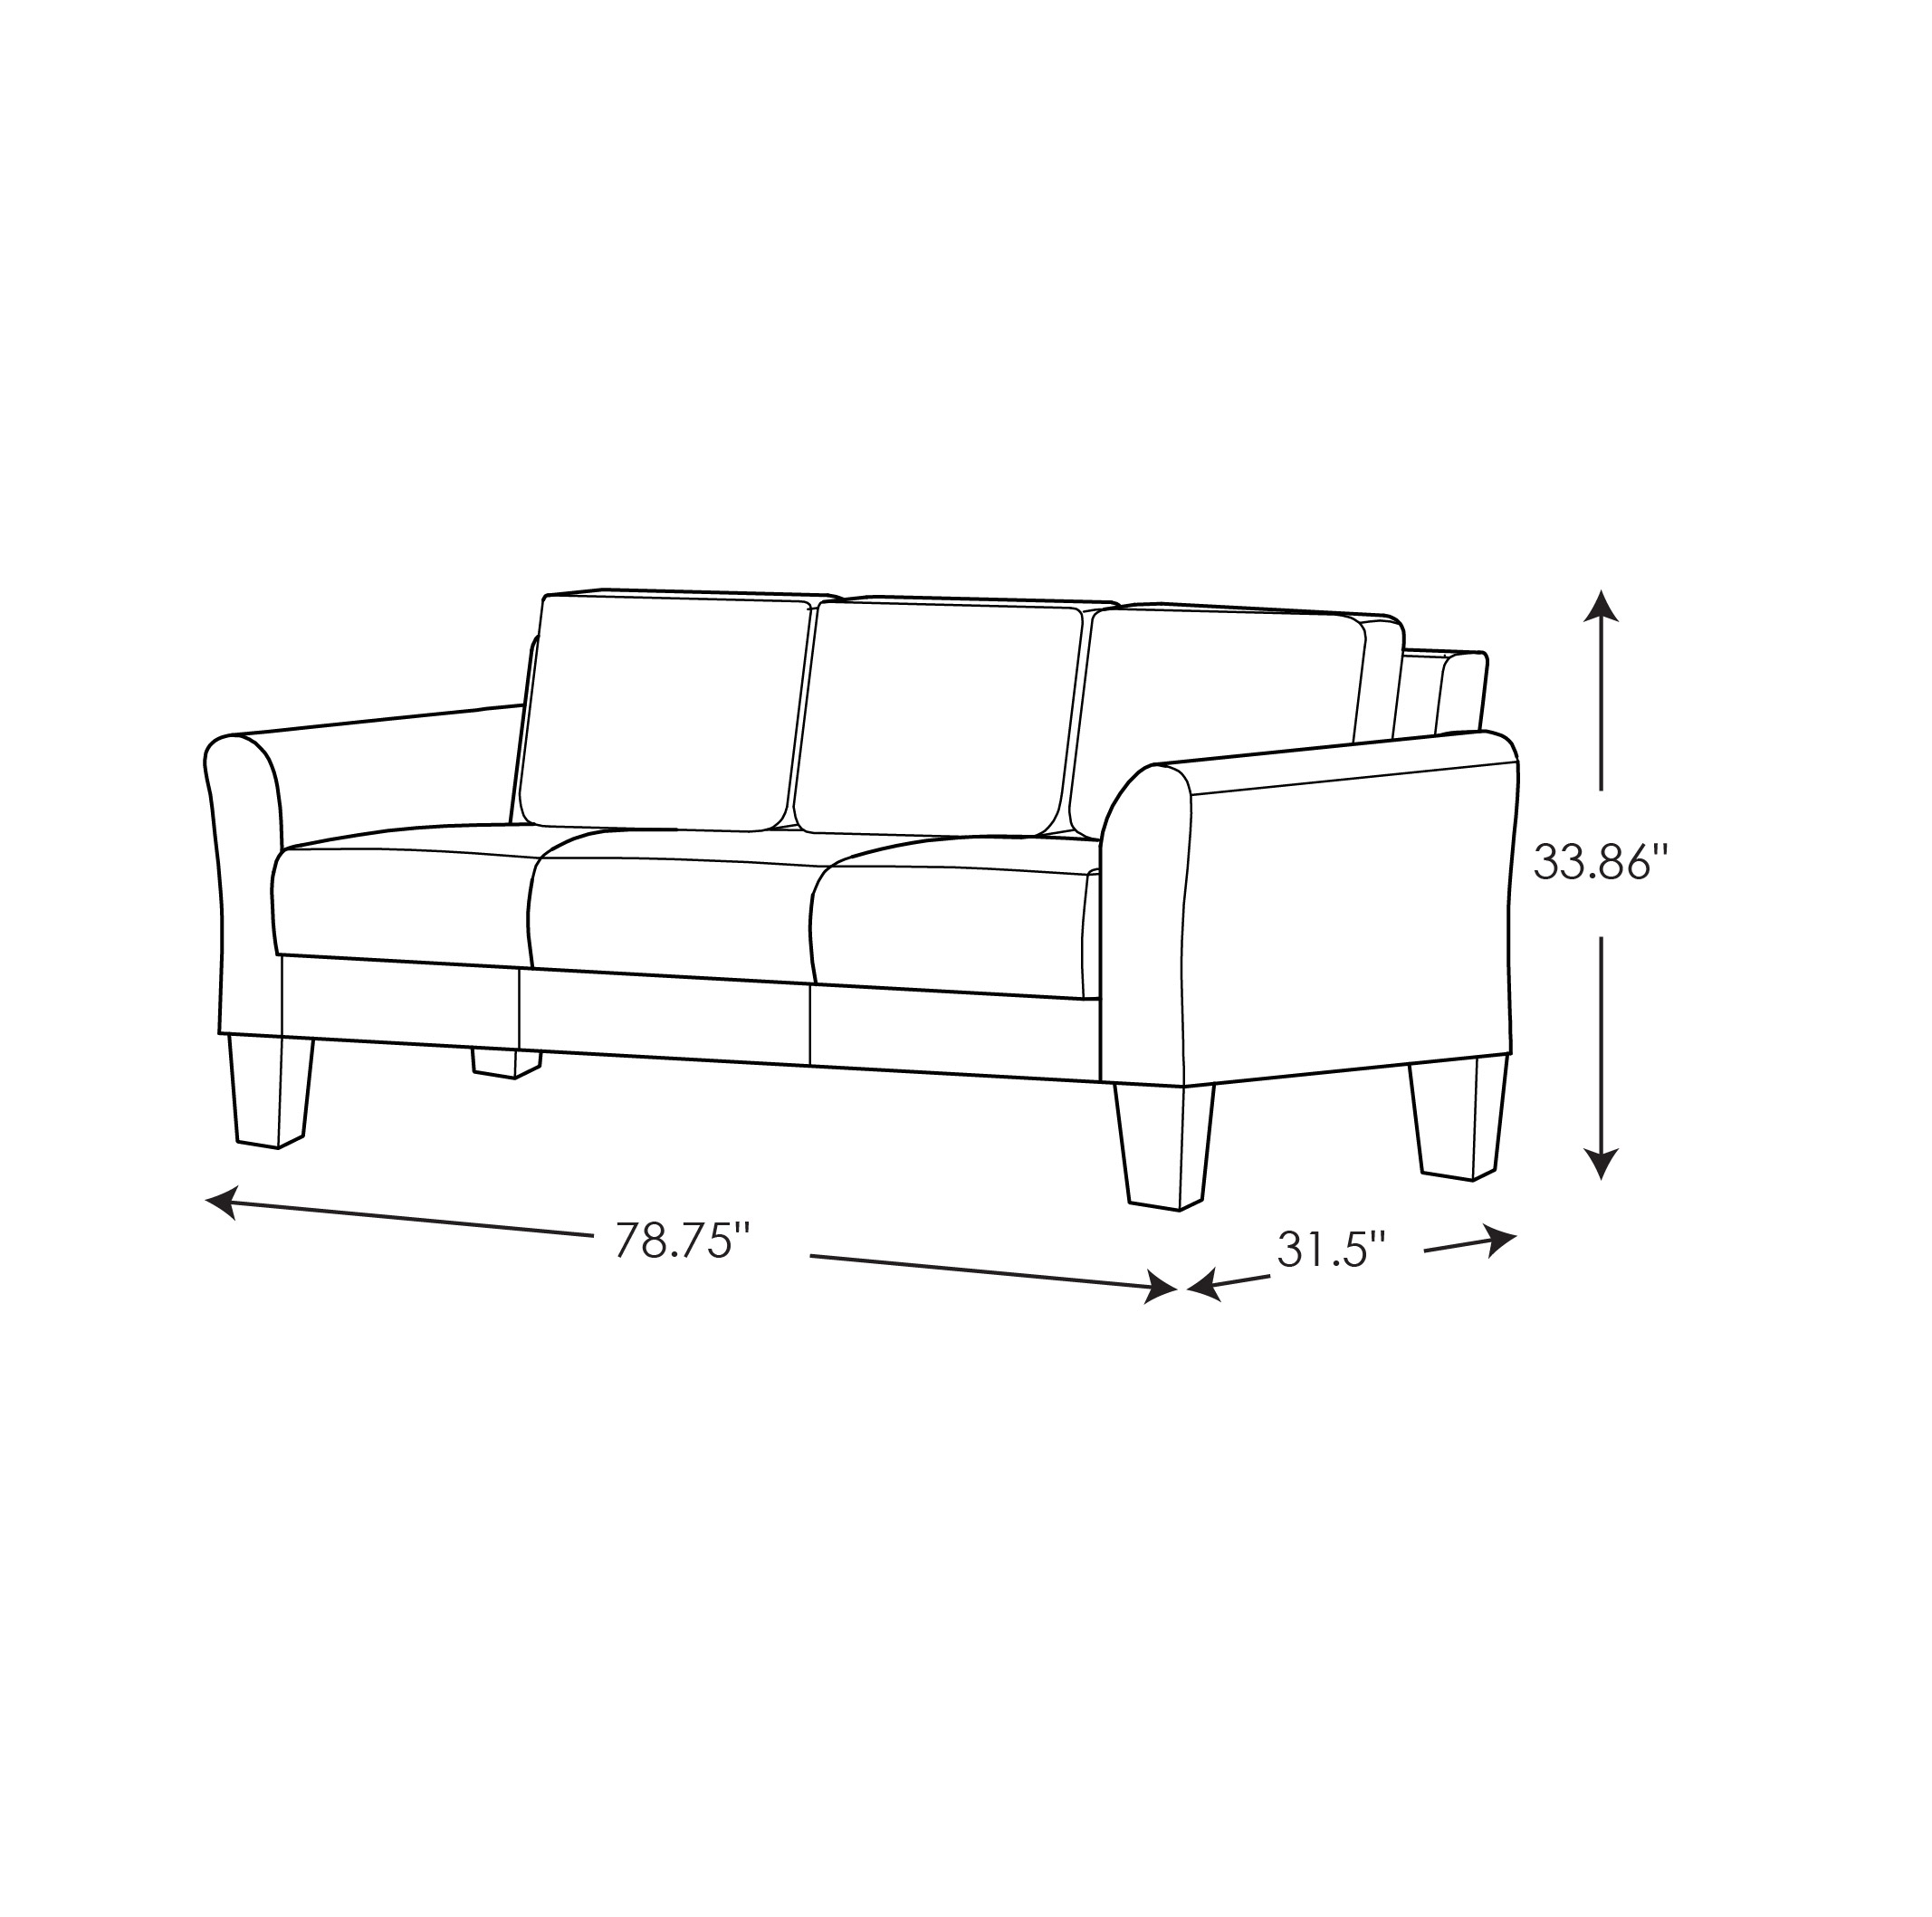 Lifestyle Solutions Alexa Sofa with Curved Arms, Gray Fabric - image 5 of 6